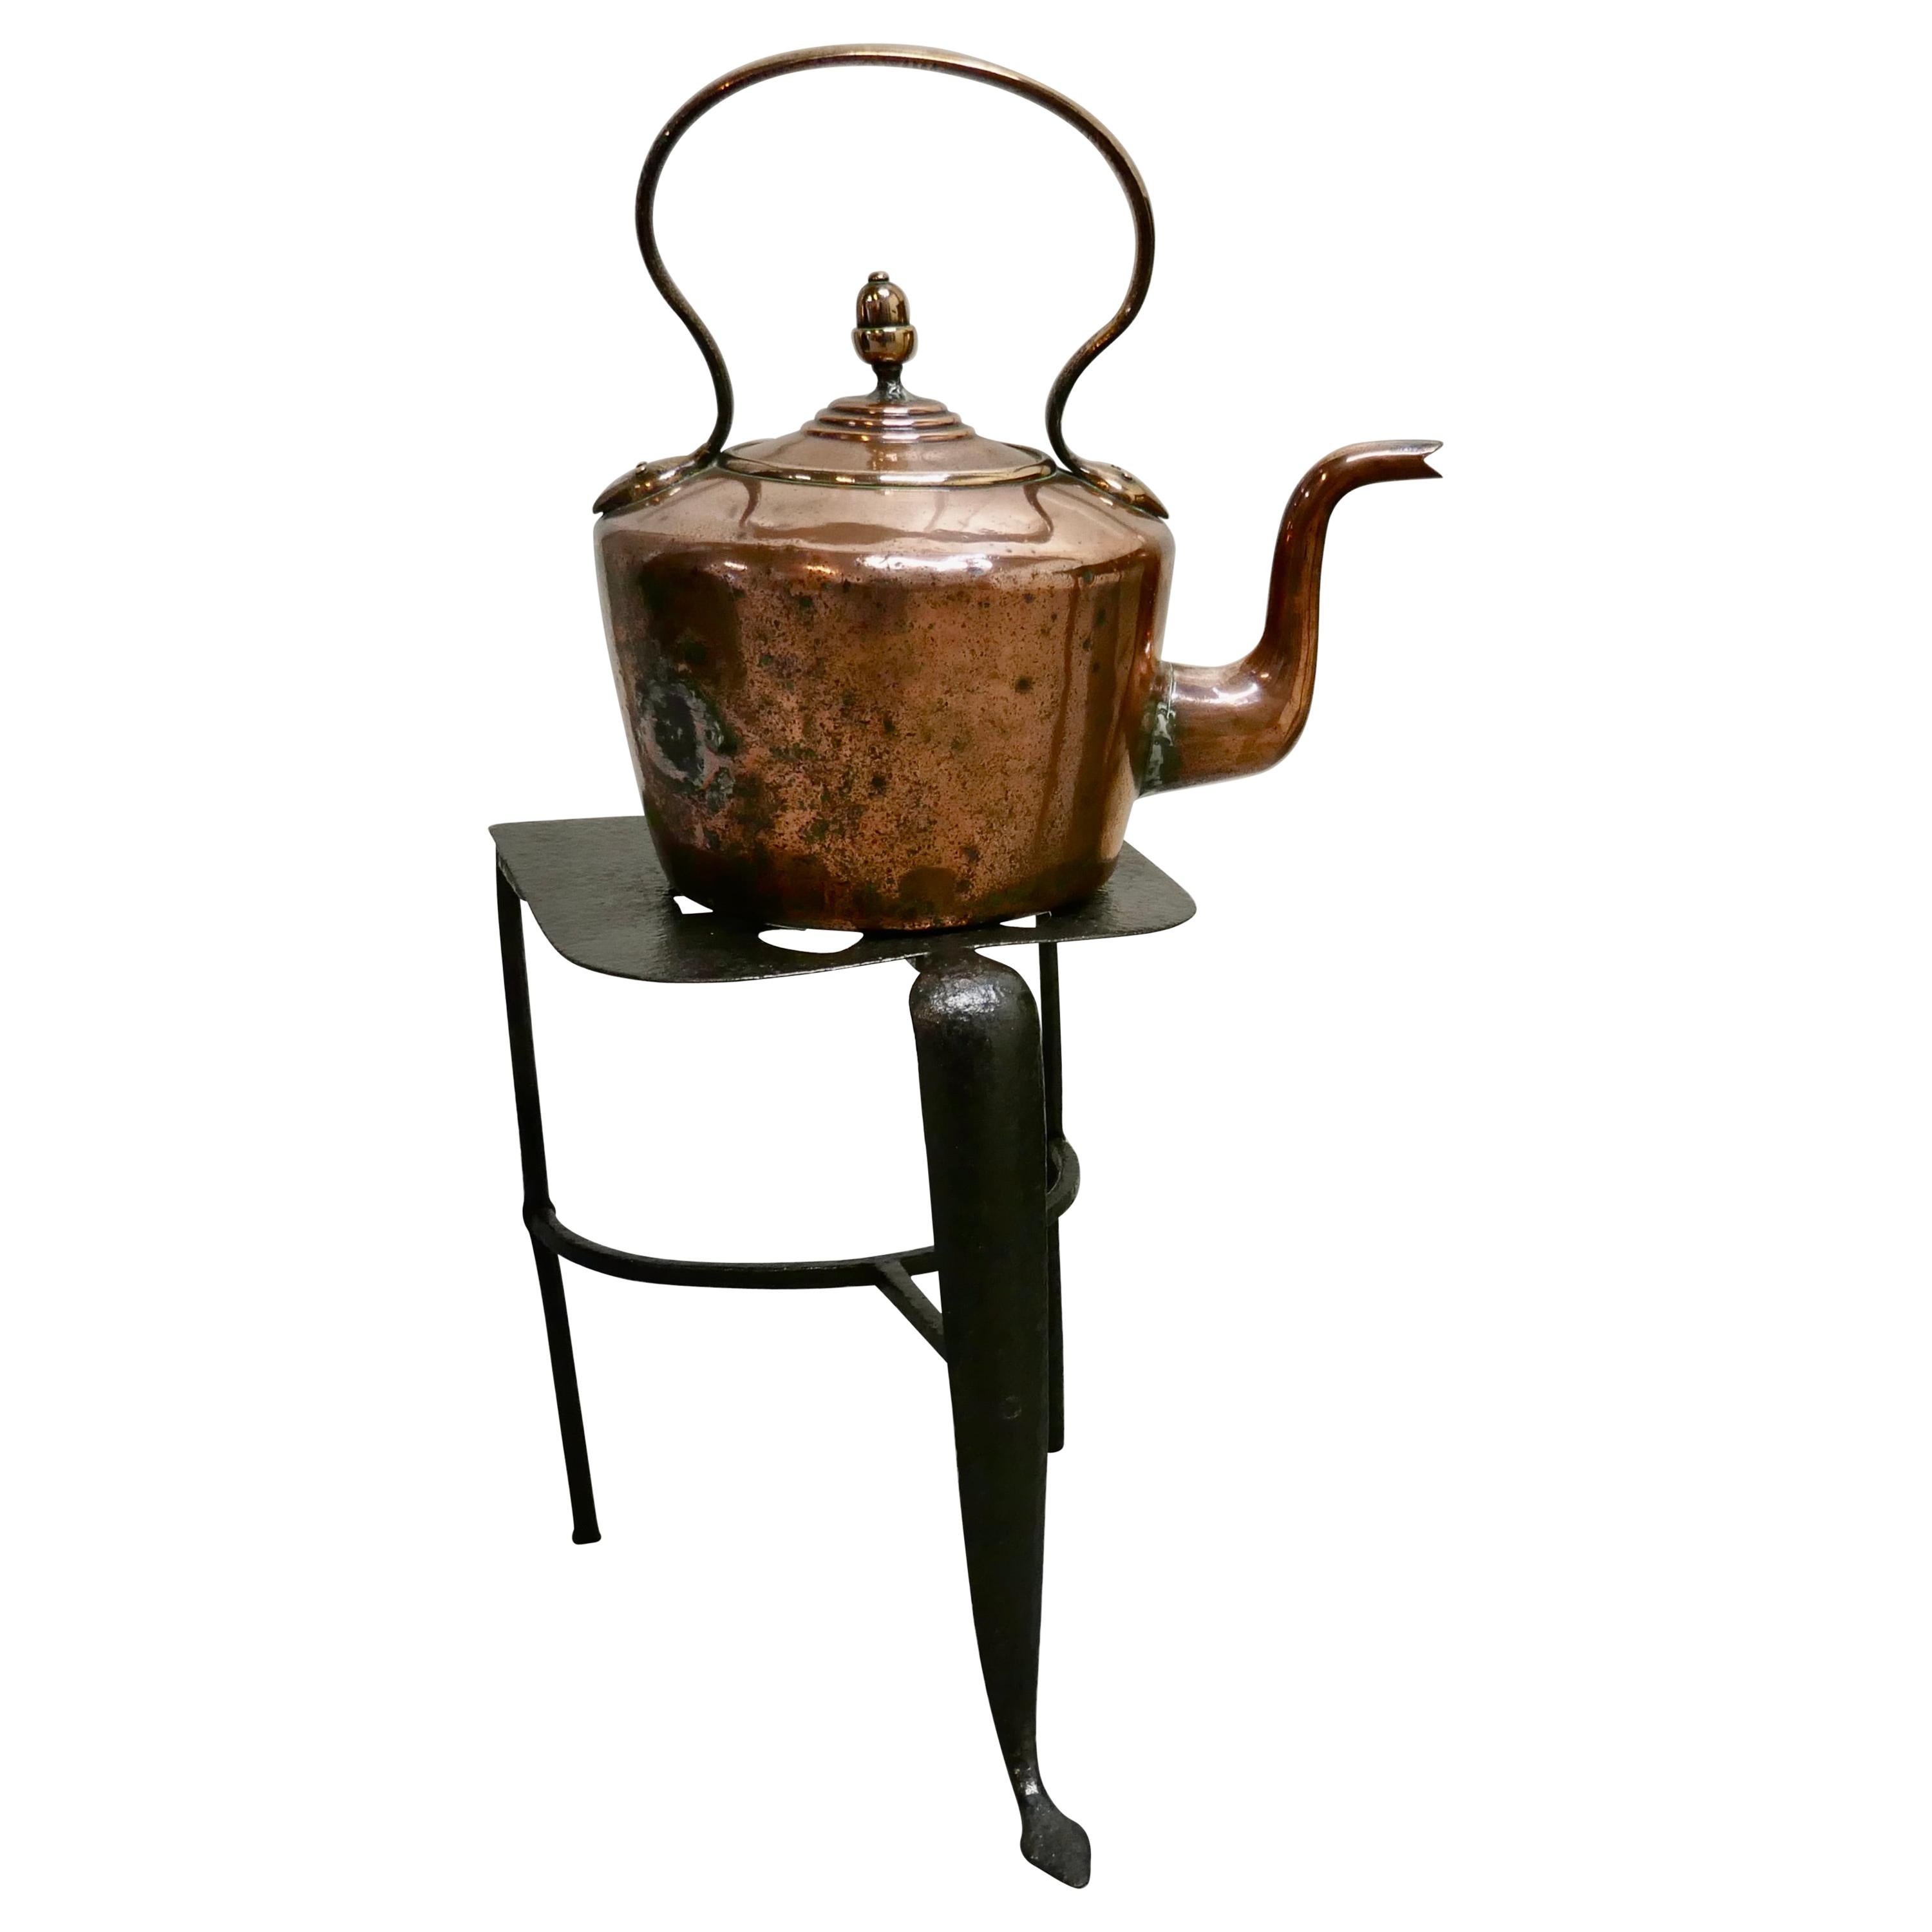 https://a.1stdibscdn.com/early-19th-century-copper-kettle-and-iron-trivet-for-sale/1121189/f_231127221616826536761/23112722_master.jpg